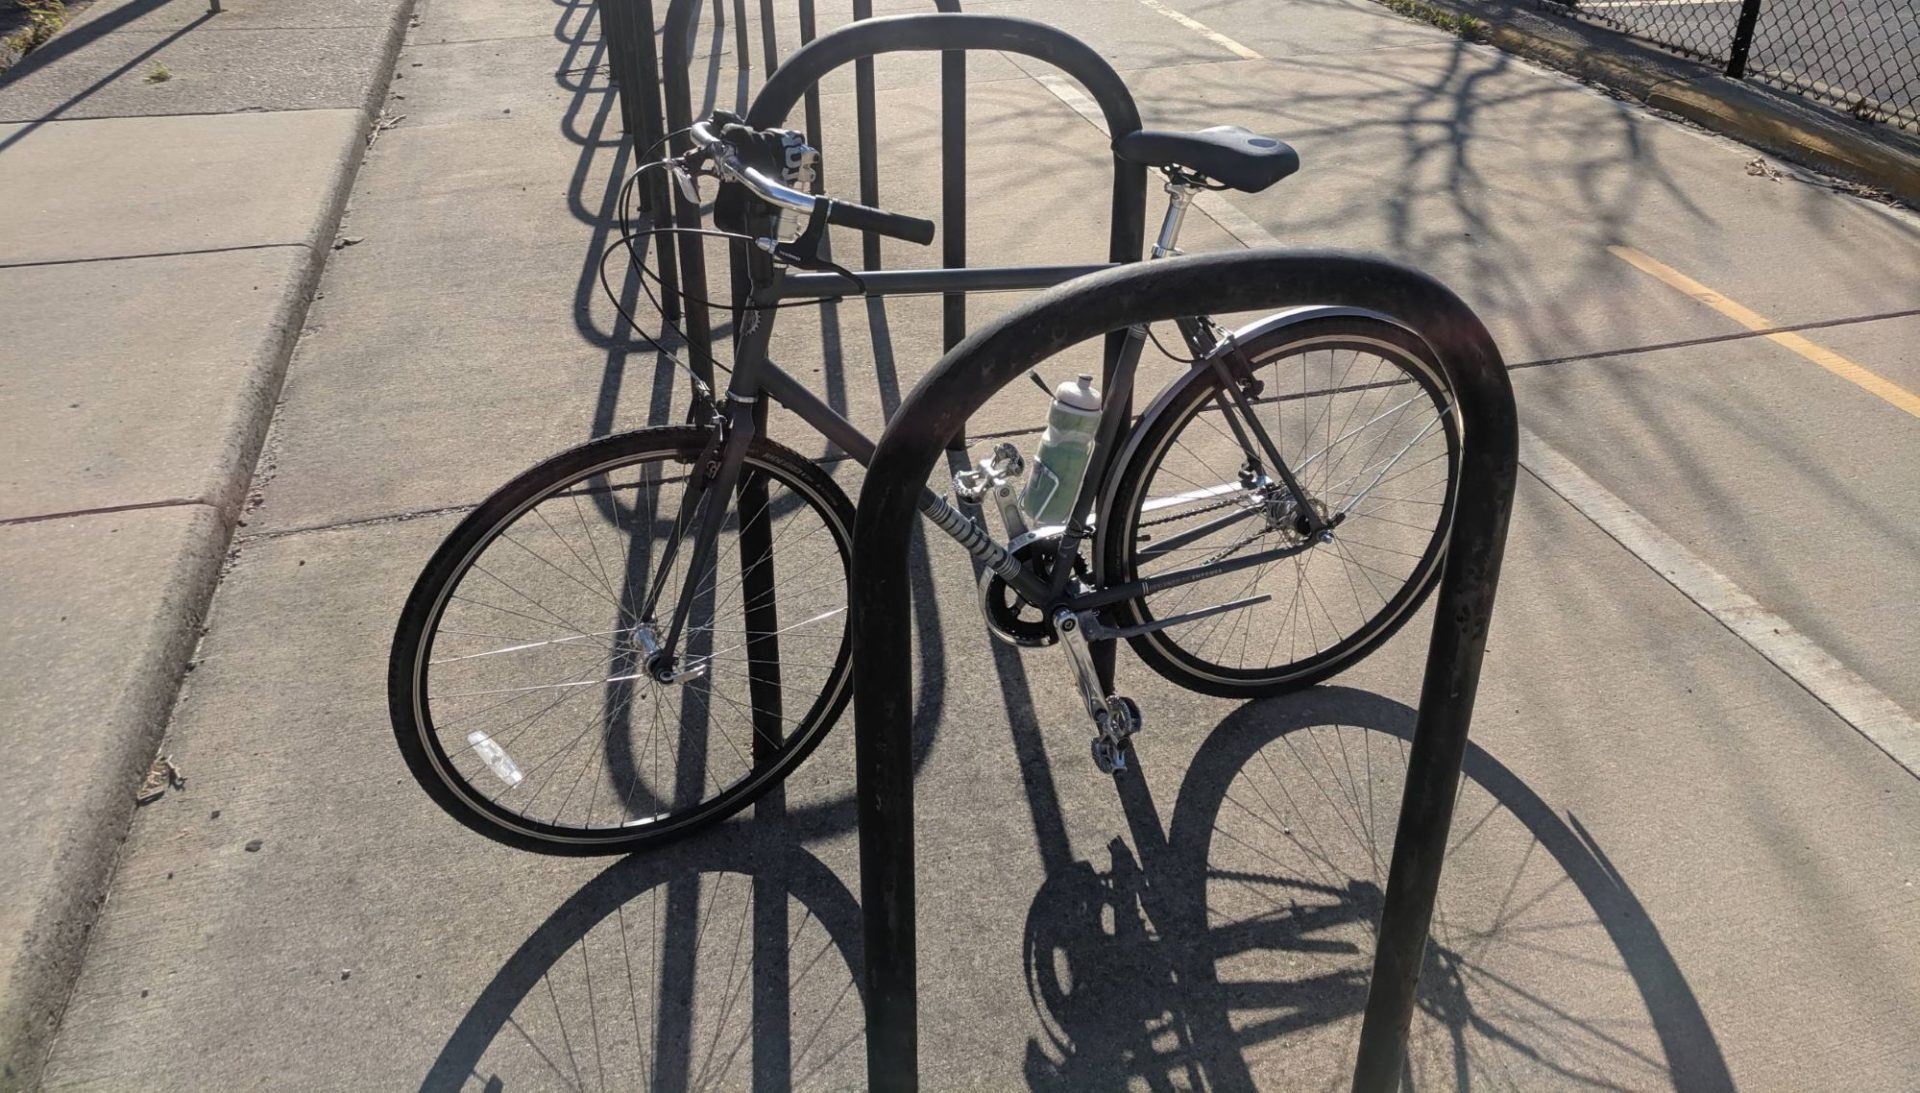 A bicycle is attached to a bike rack with several U shapes made of black metal. The sun is shining and creating a shadow of the bike on the concrete.